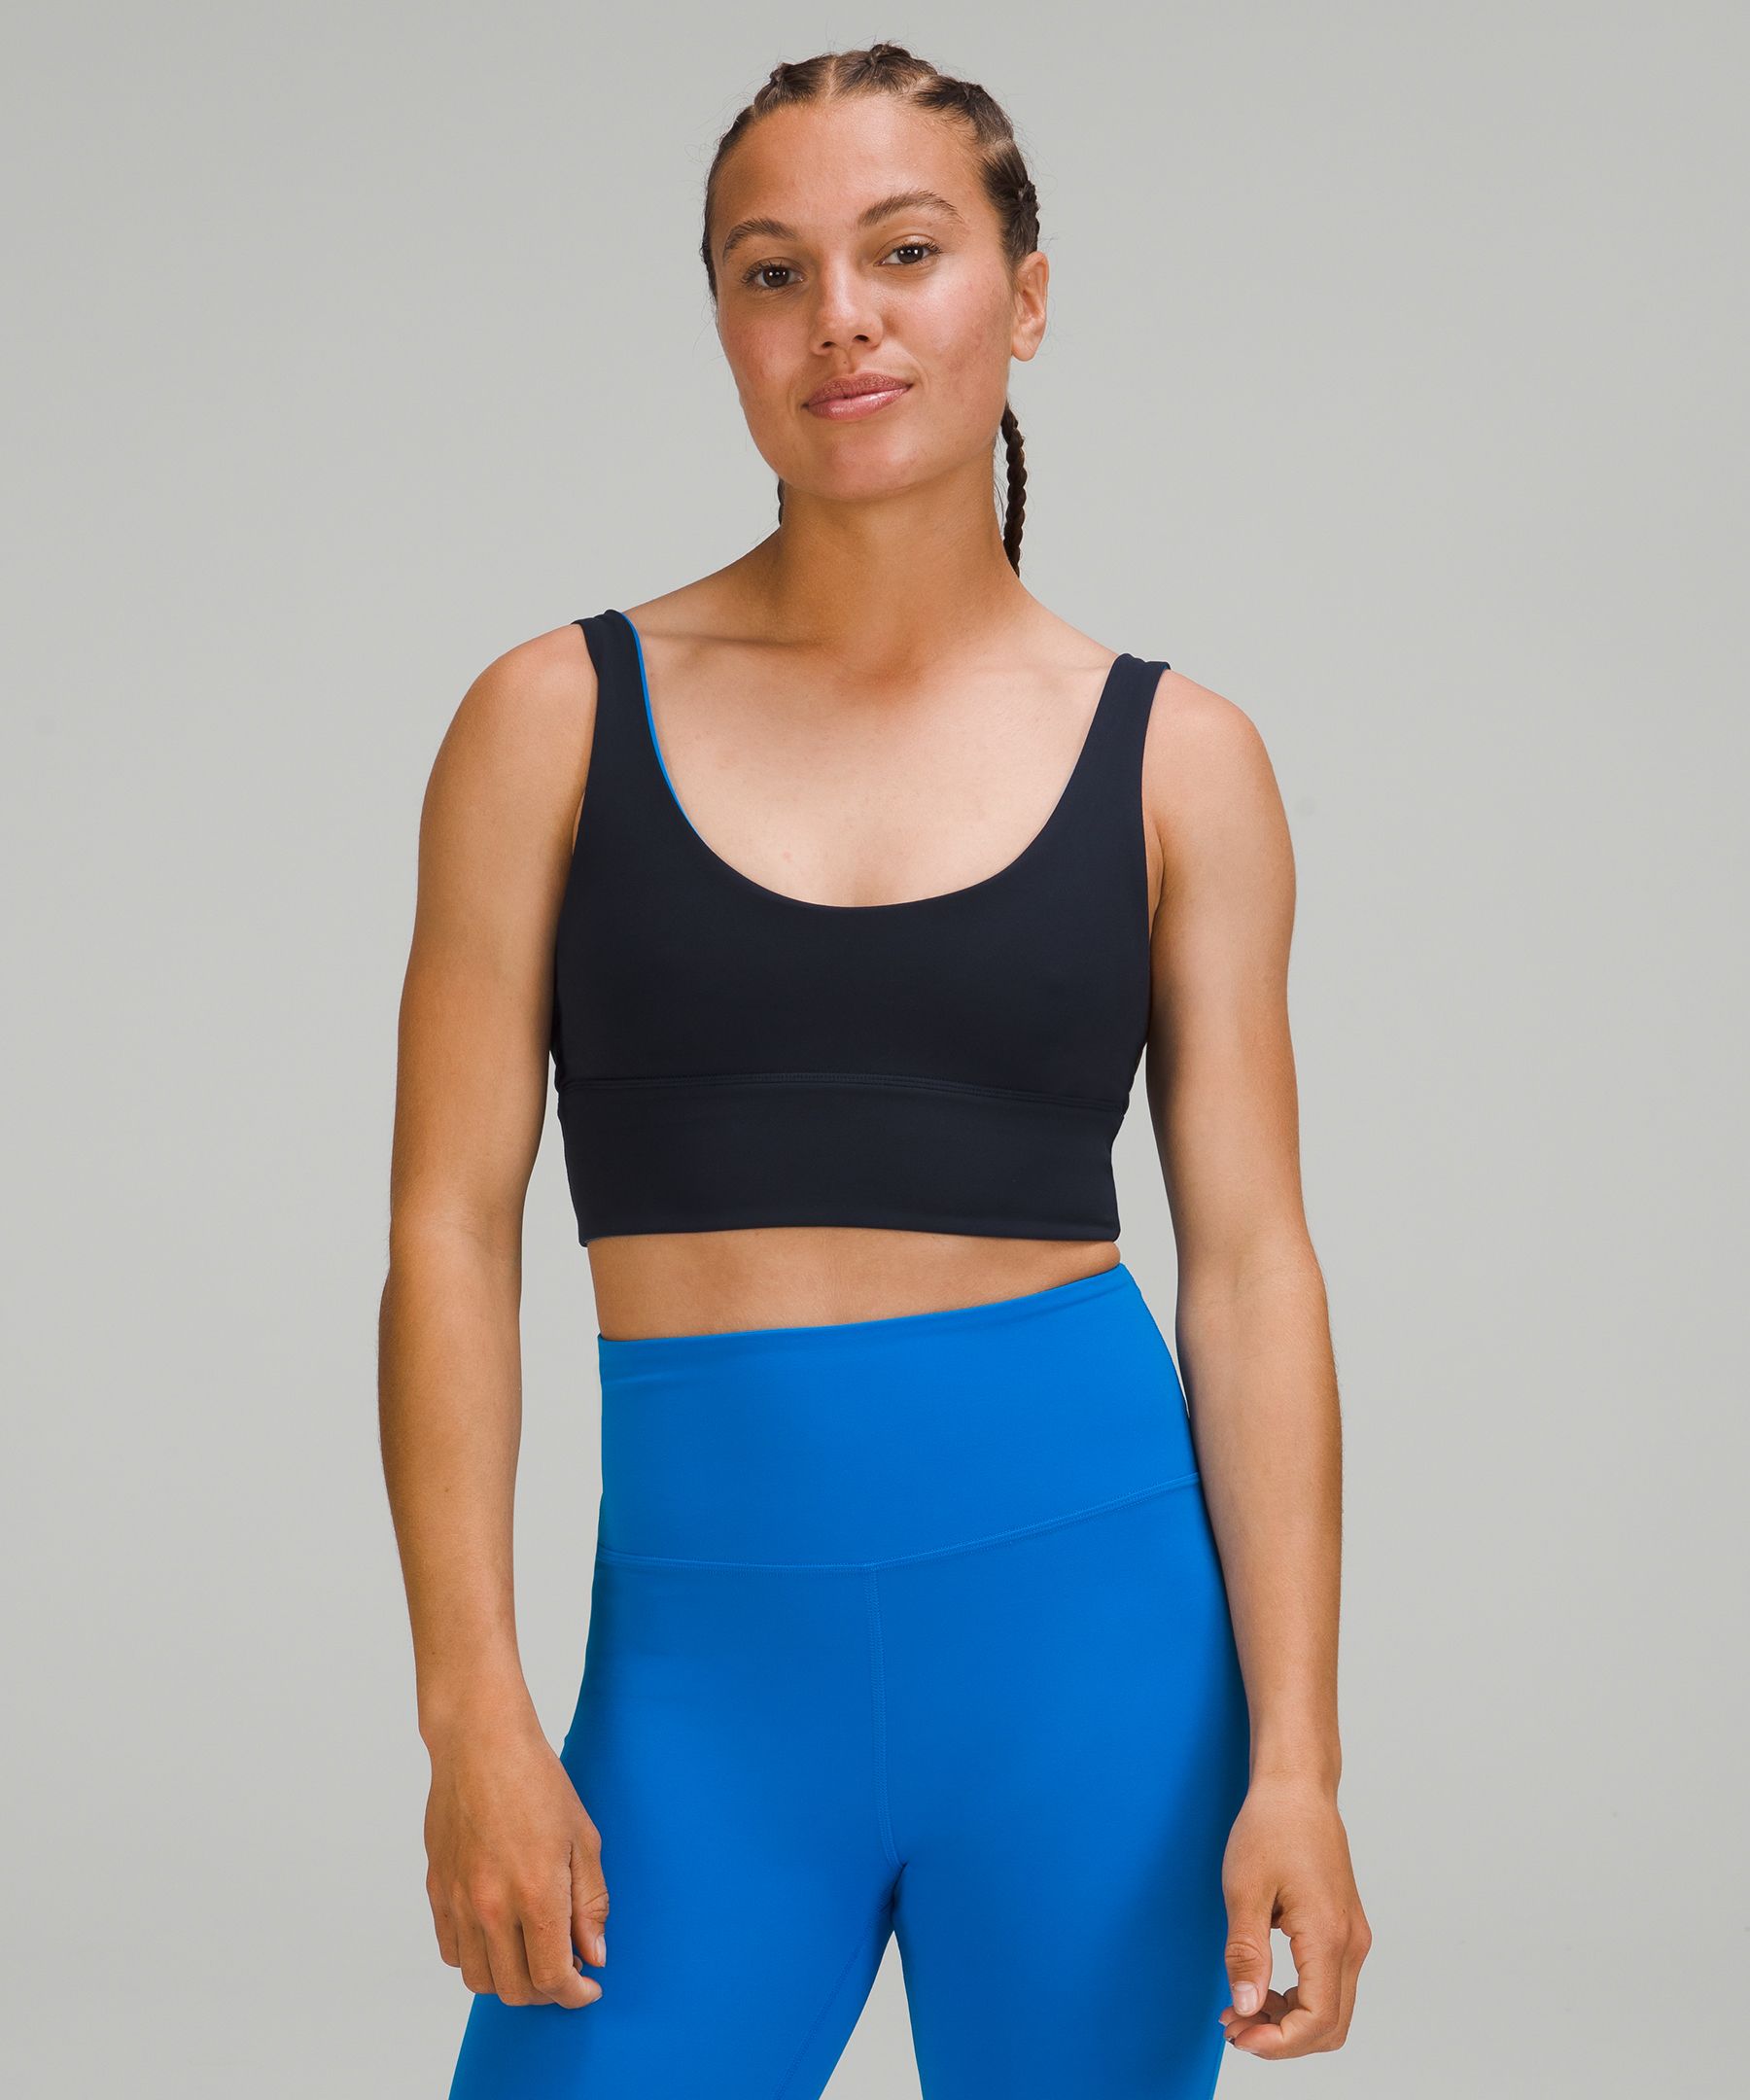 Lululemon Align™ Reversible Bra Light Support, A/b Cup In French Press/black